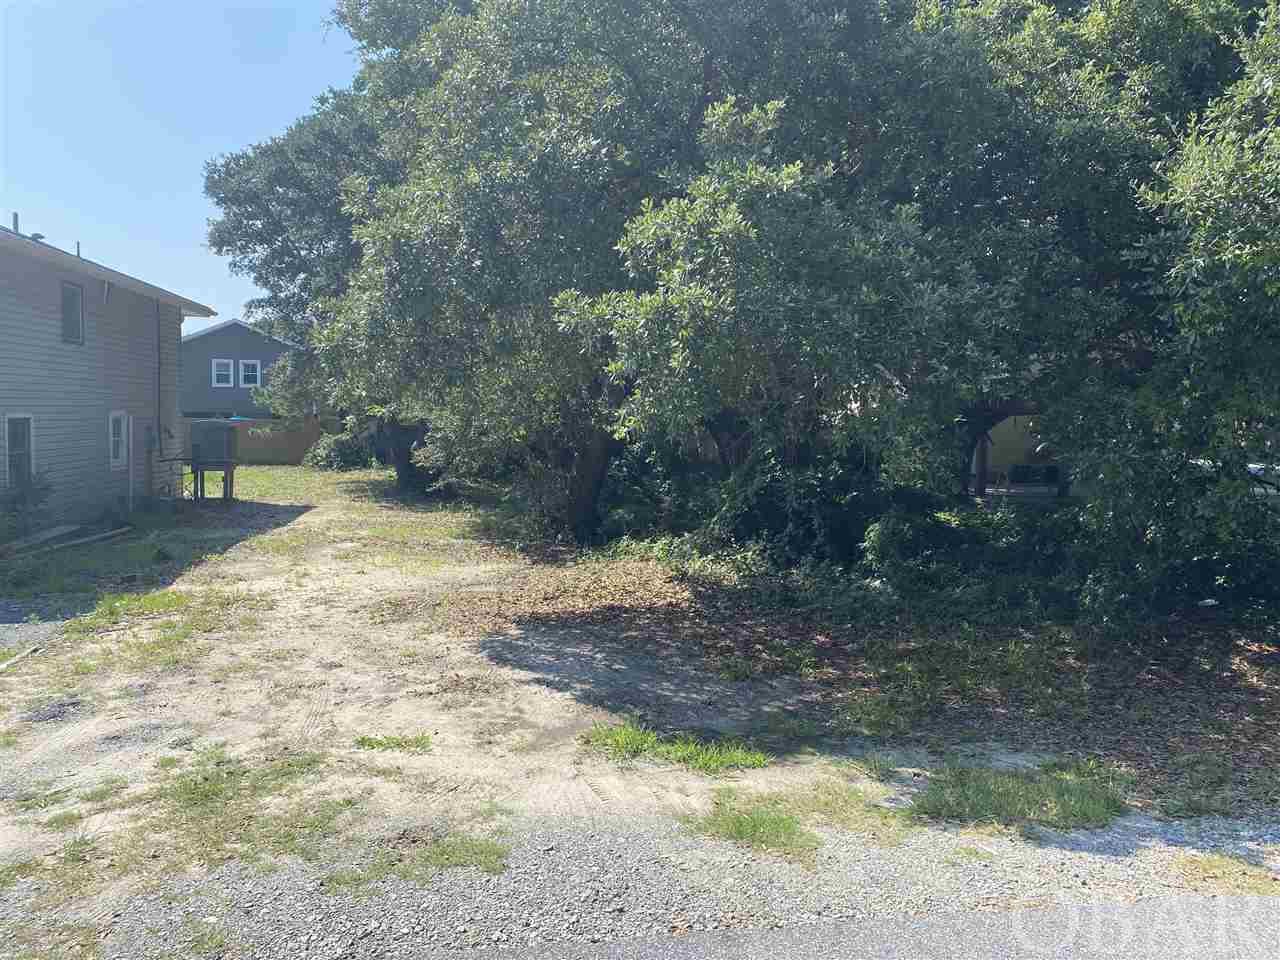 Nice building lot located in the heart of Kill Devil Hills.  The property is a short walk to scenic Bay Drive and less than a mile from the public boat ramp.  There are tons of popular restaurants, shopping and attractions within a short distance of this lot.  Build your custom Outer Banks dream home.